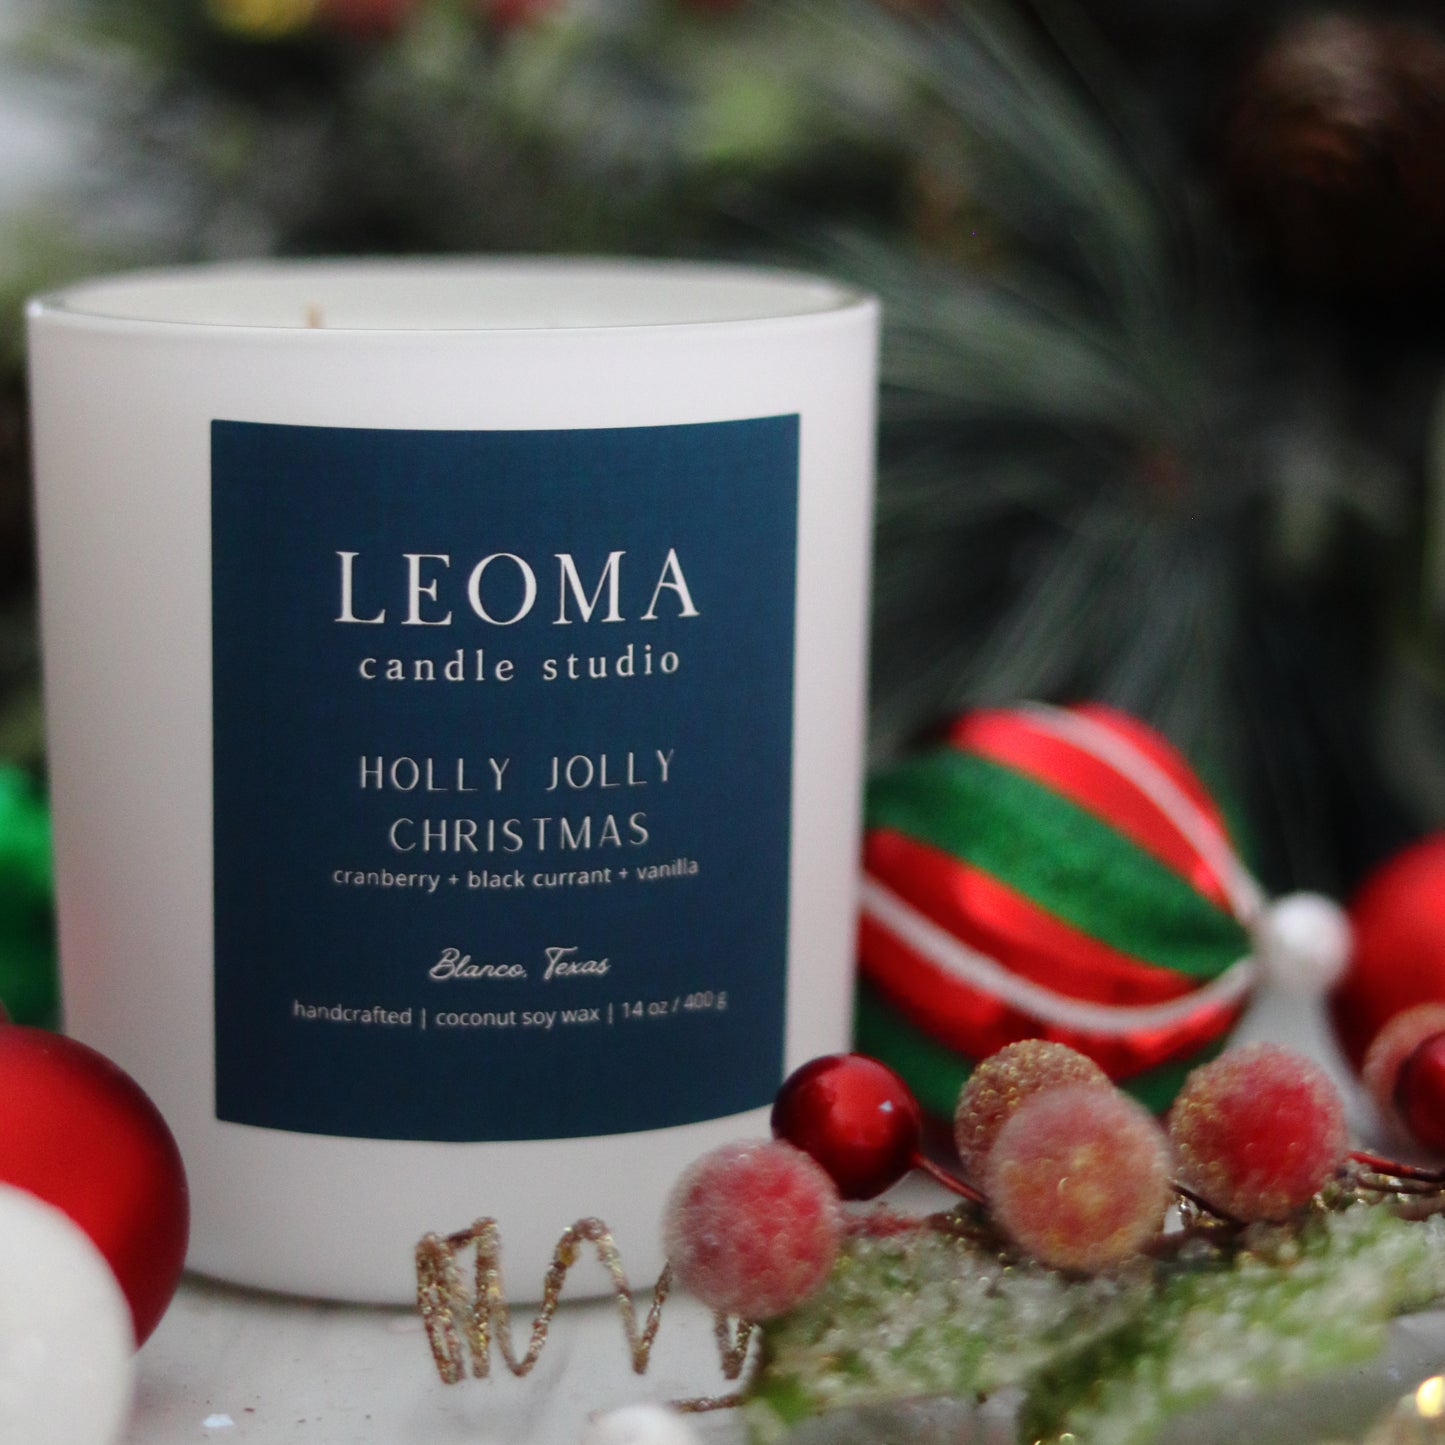 Handcrafted eco-friendly scented candle. Natural coconut & soy wax, toxin-free, 100% cotton wicks. White vessel. Holly Jolly Christmas scented.